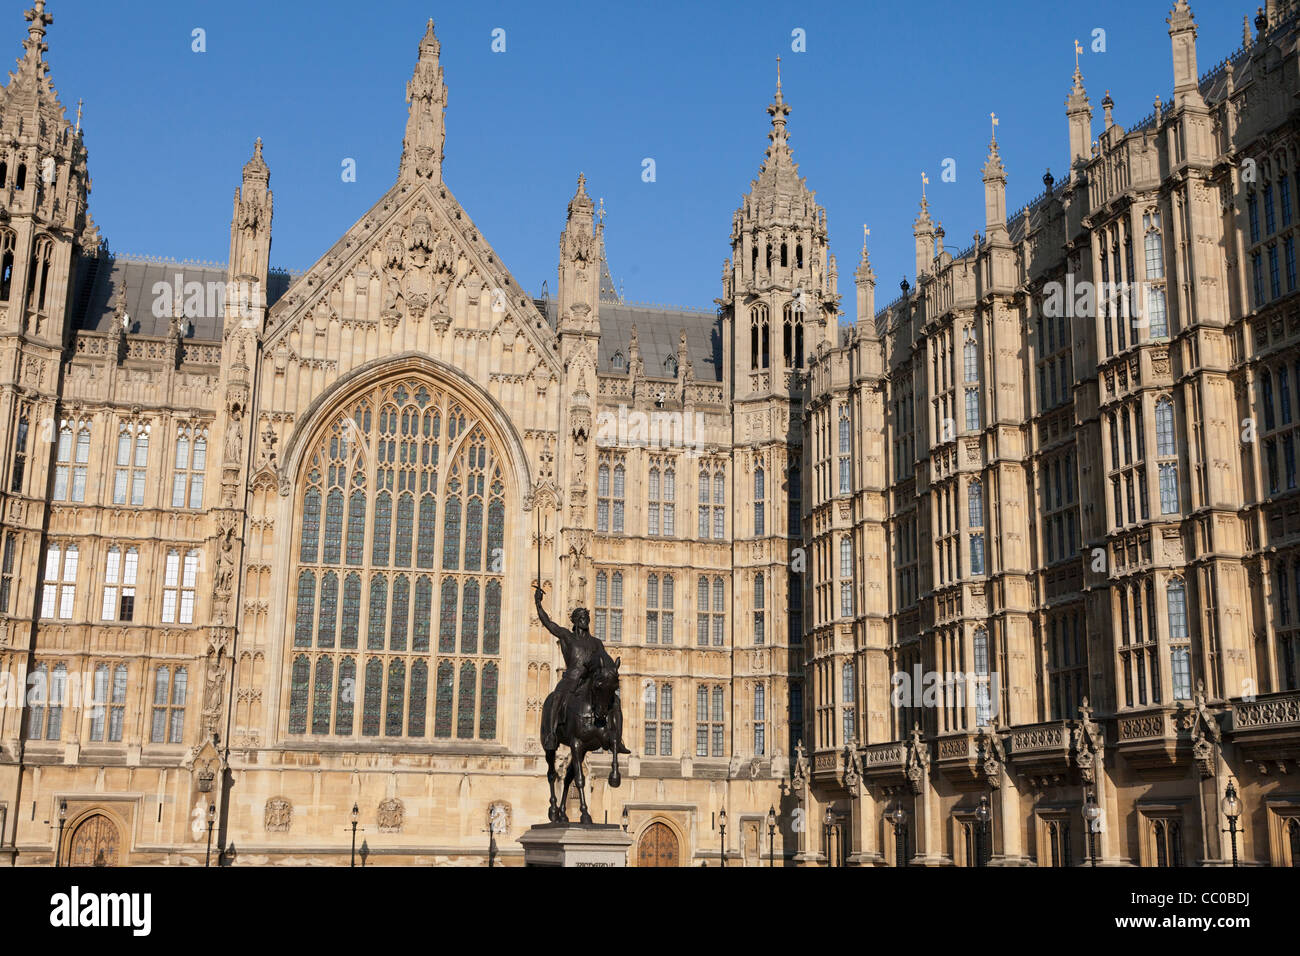 Statue of Richard the Lionheart and House of Parliament, London, UK Stock Photo